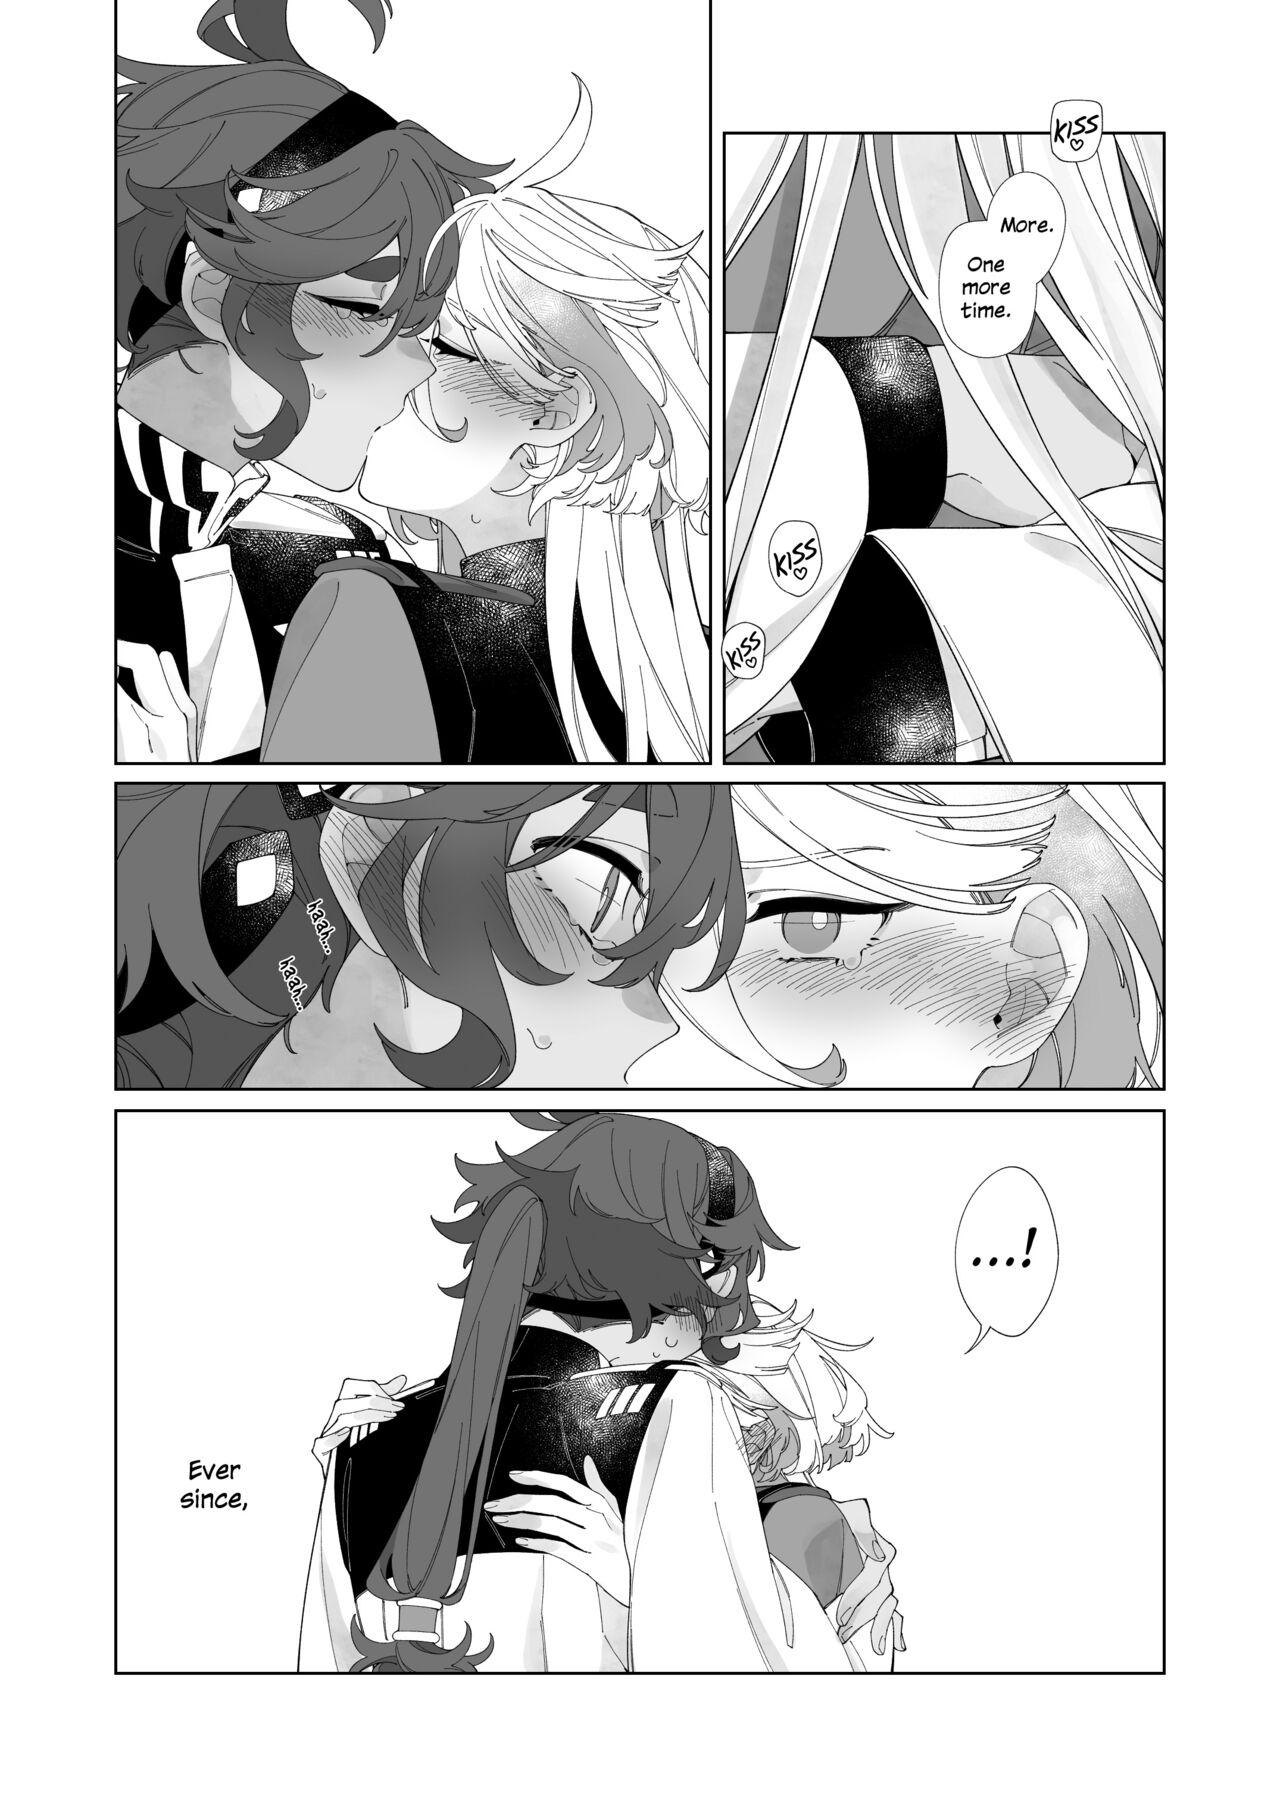 Super Kiss no Ato Nani ga Shitai? | After Kissing, What Else Do You Want to Do? - Mobile suit gundam the witch from mercury Phat - Page 7